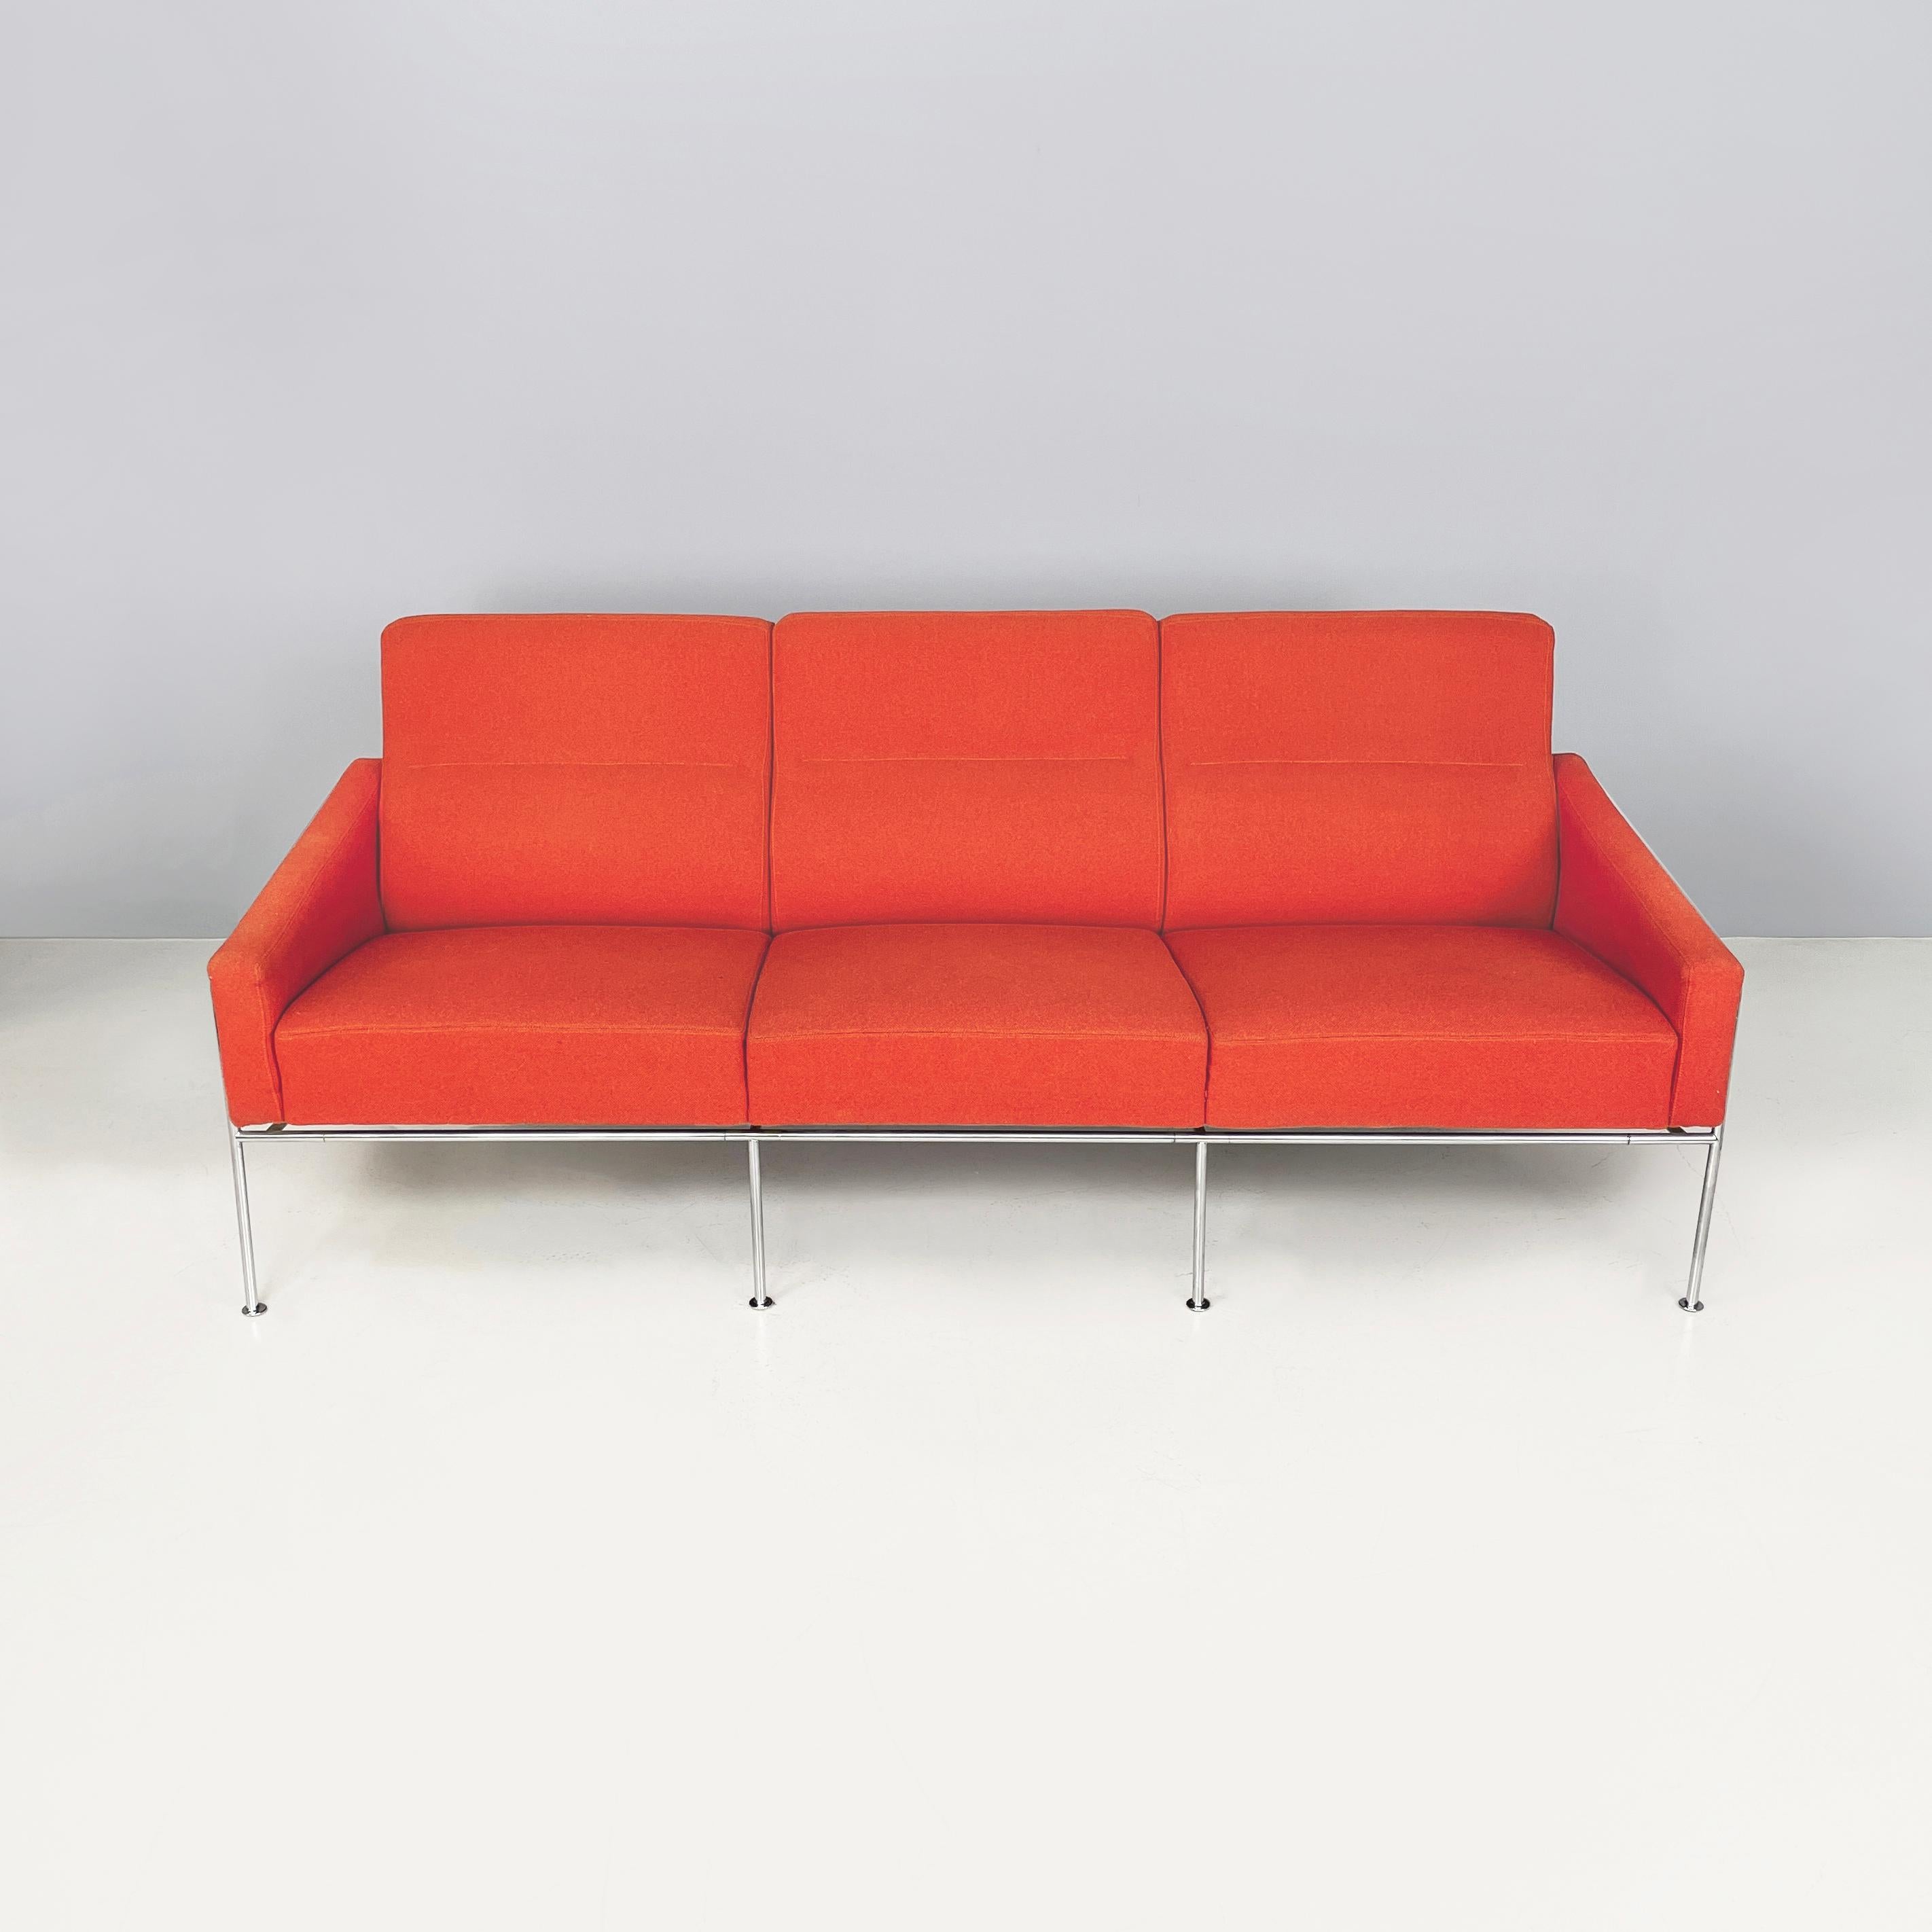 Denmark Three-seater sofa 3303 Airport by Arne Jacobsen for Fritz Hansen, 1993
Three-seater sofa mod. 3303 Airport with square seat and backrest, padded and covered in red fabric. Square armrests. The structure is made of metal rod. Round metal